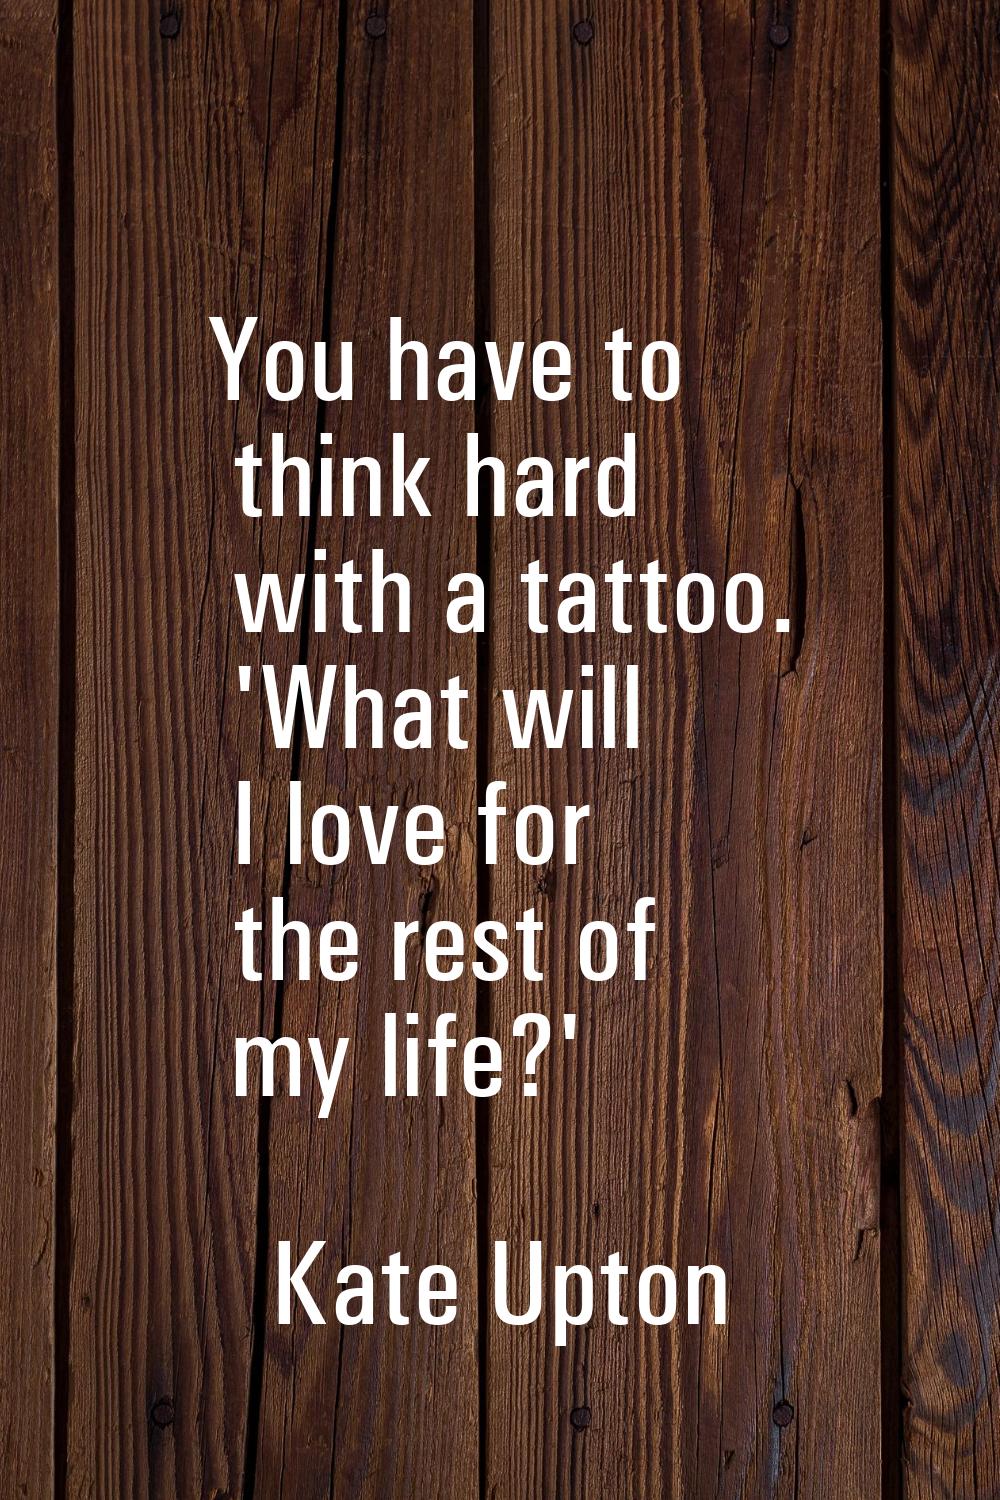 You have to think hard with a tattoo. 'What will I love for the rest of my life?'